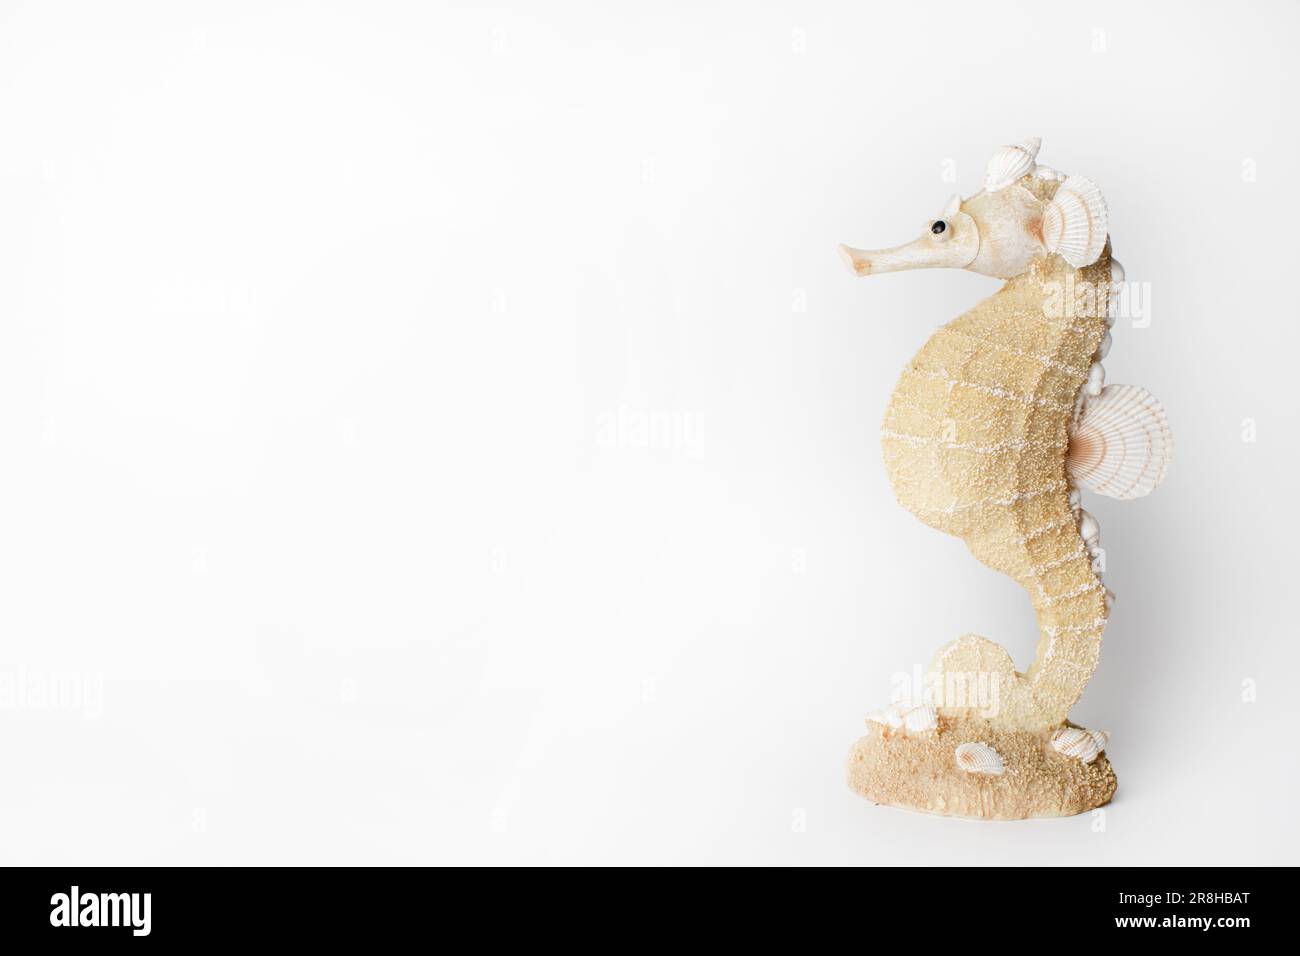 Seahorse figurine isolated on the white background. Copy space Stock Photo